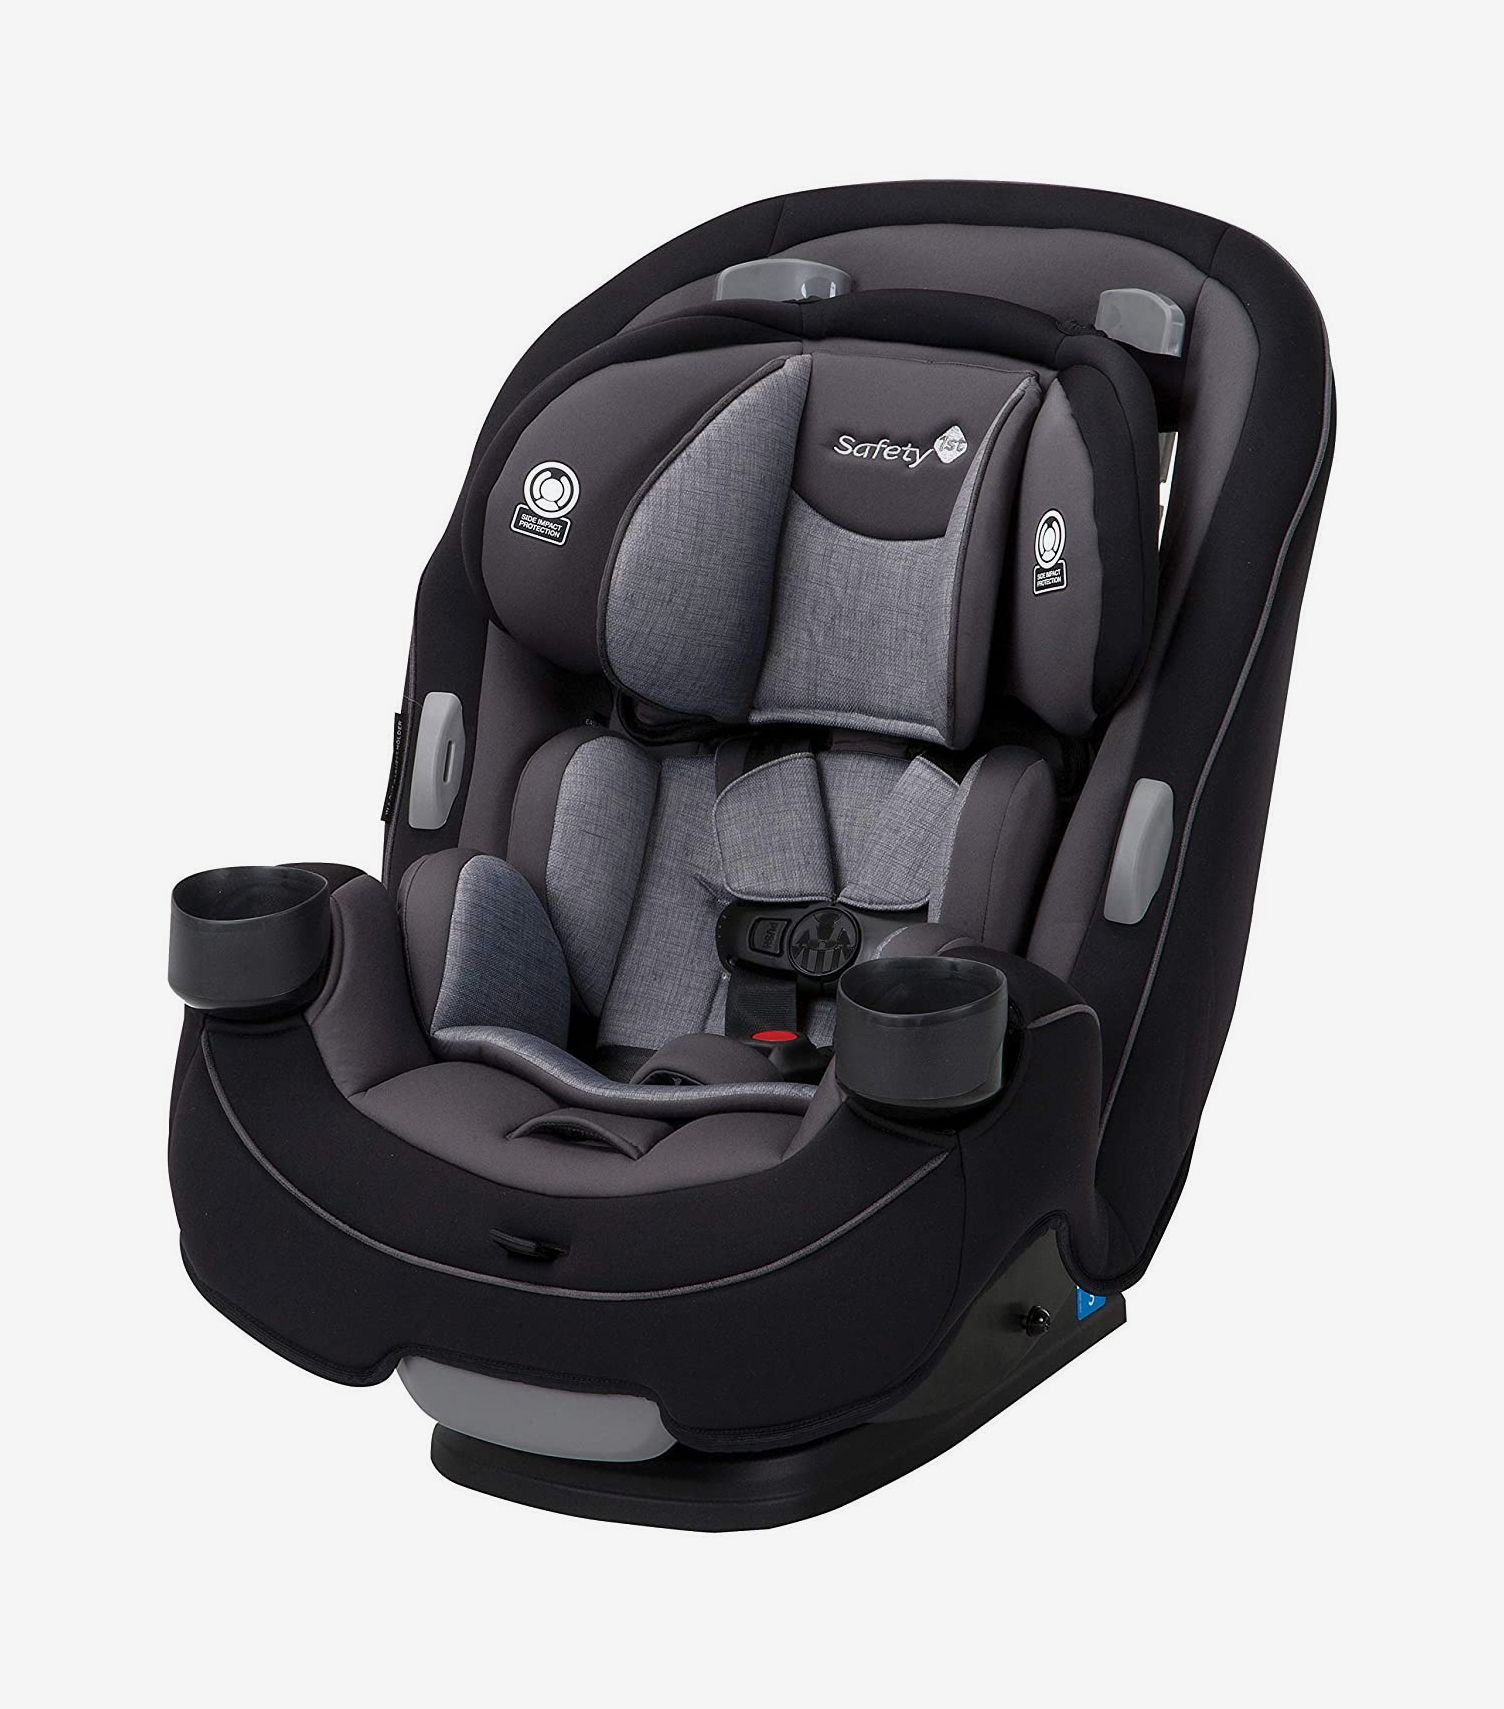 Infant Car Seats And Booster, What Is The Best And Safest Baby Car Seat